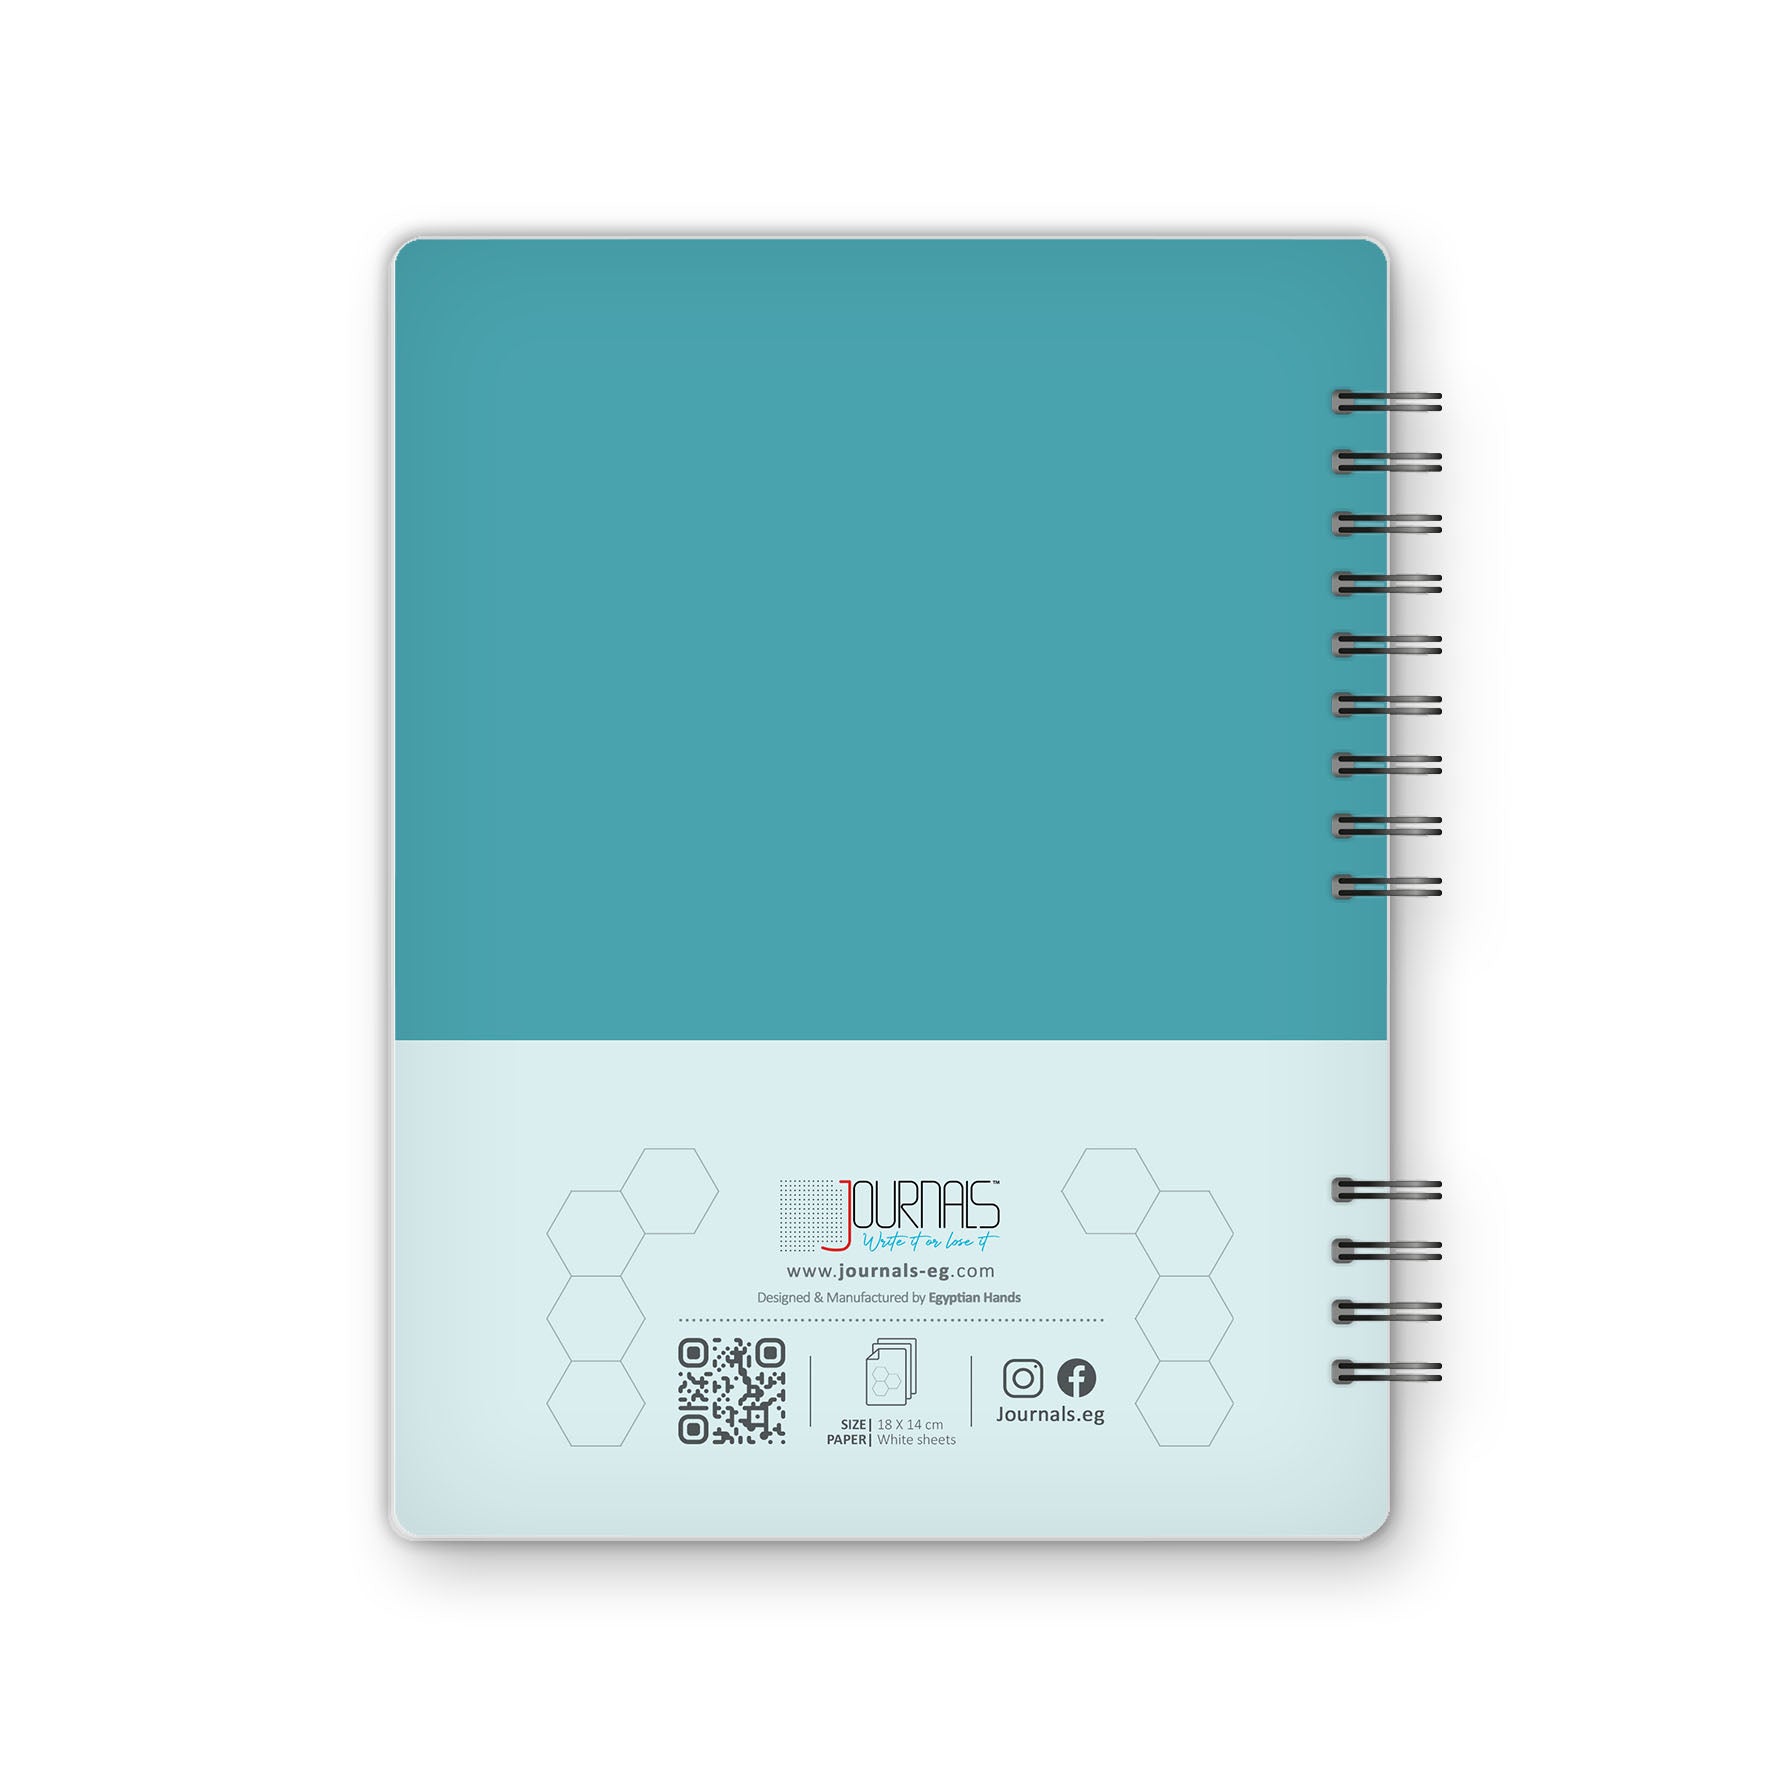 Hexa Grid - 18X14 cm - 75 Sheets | Teal - from Journals